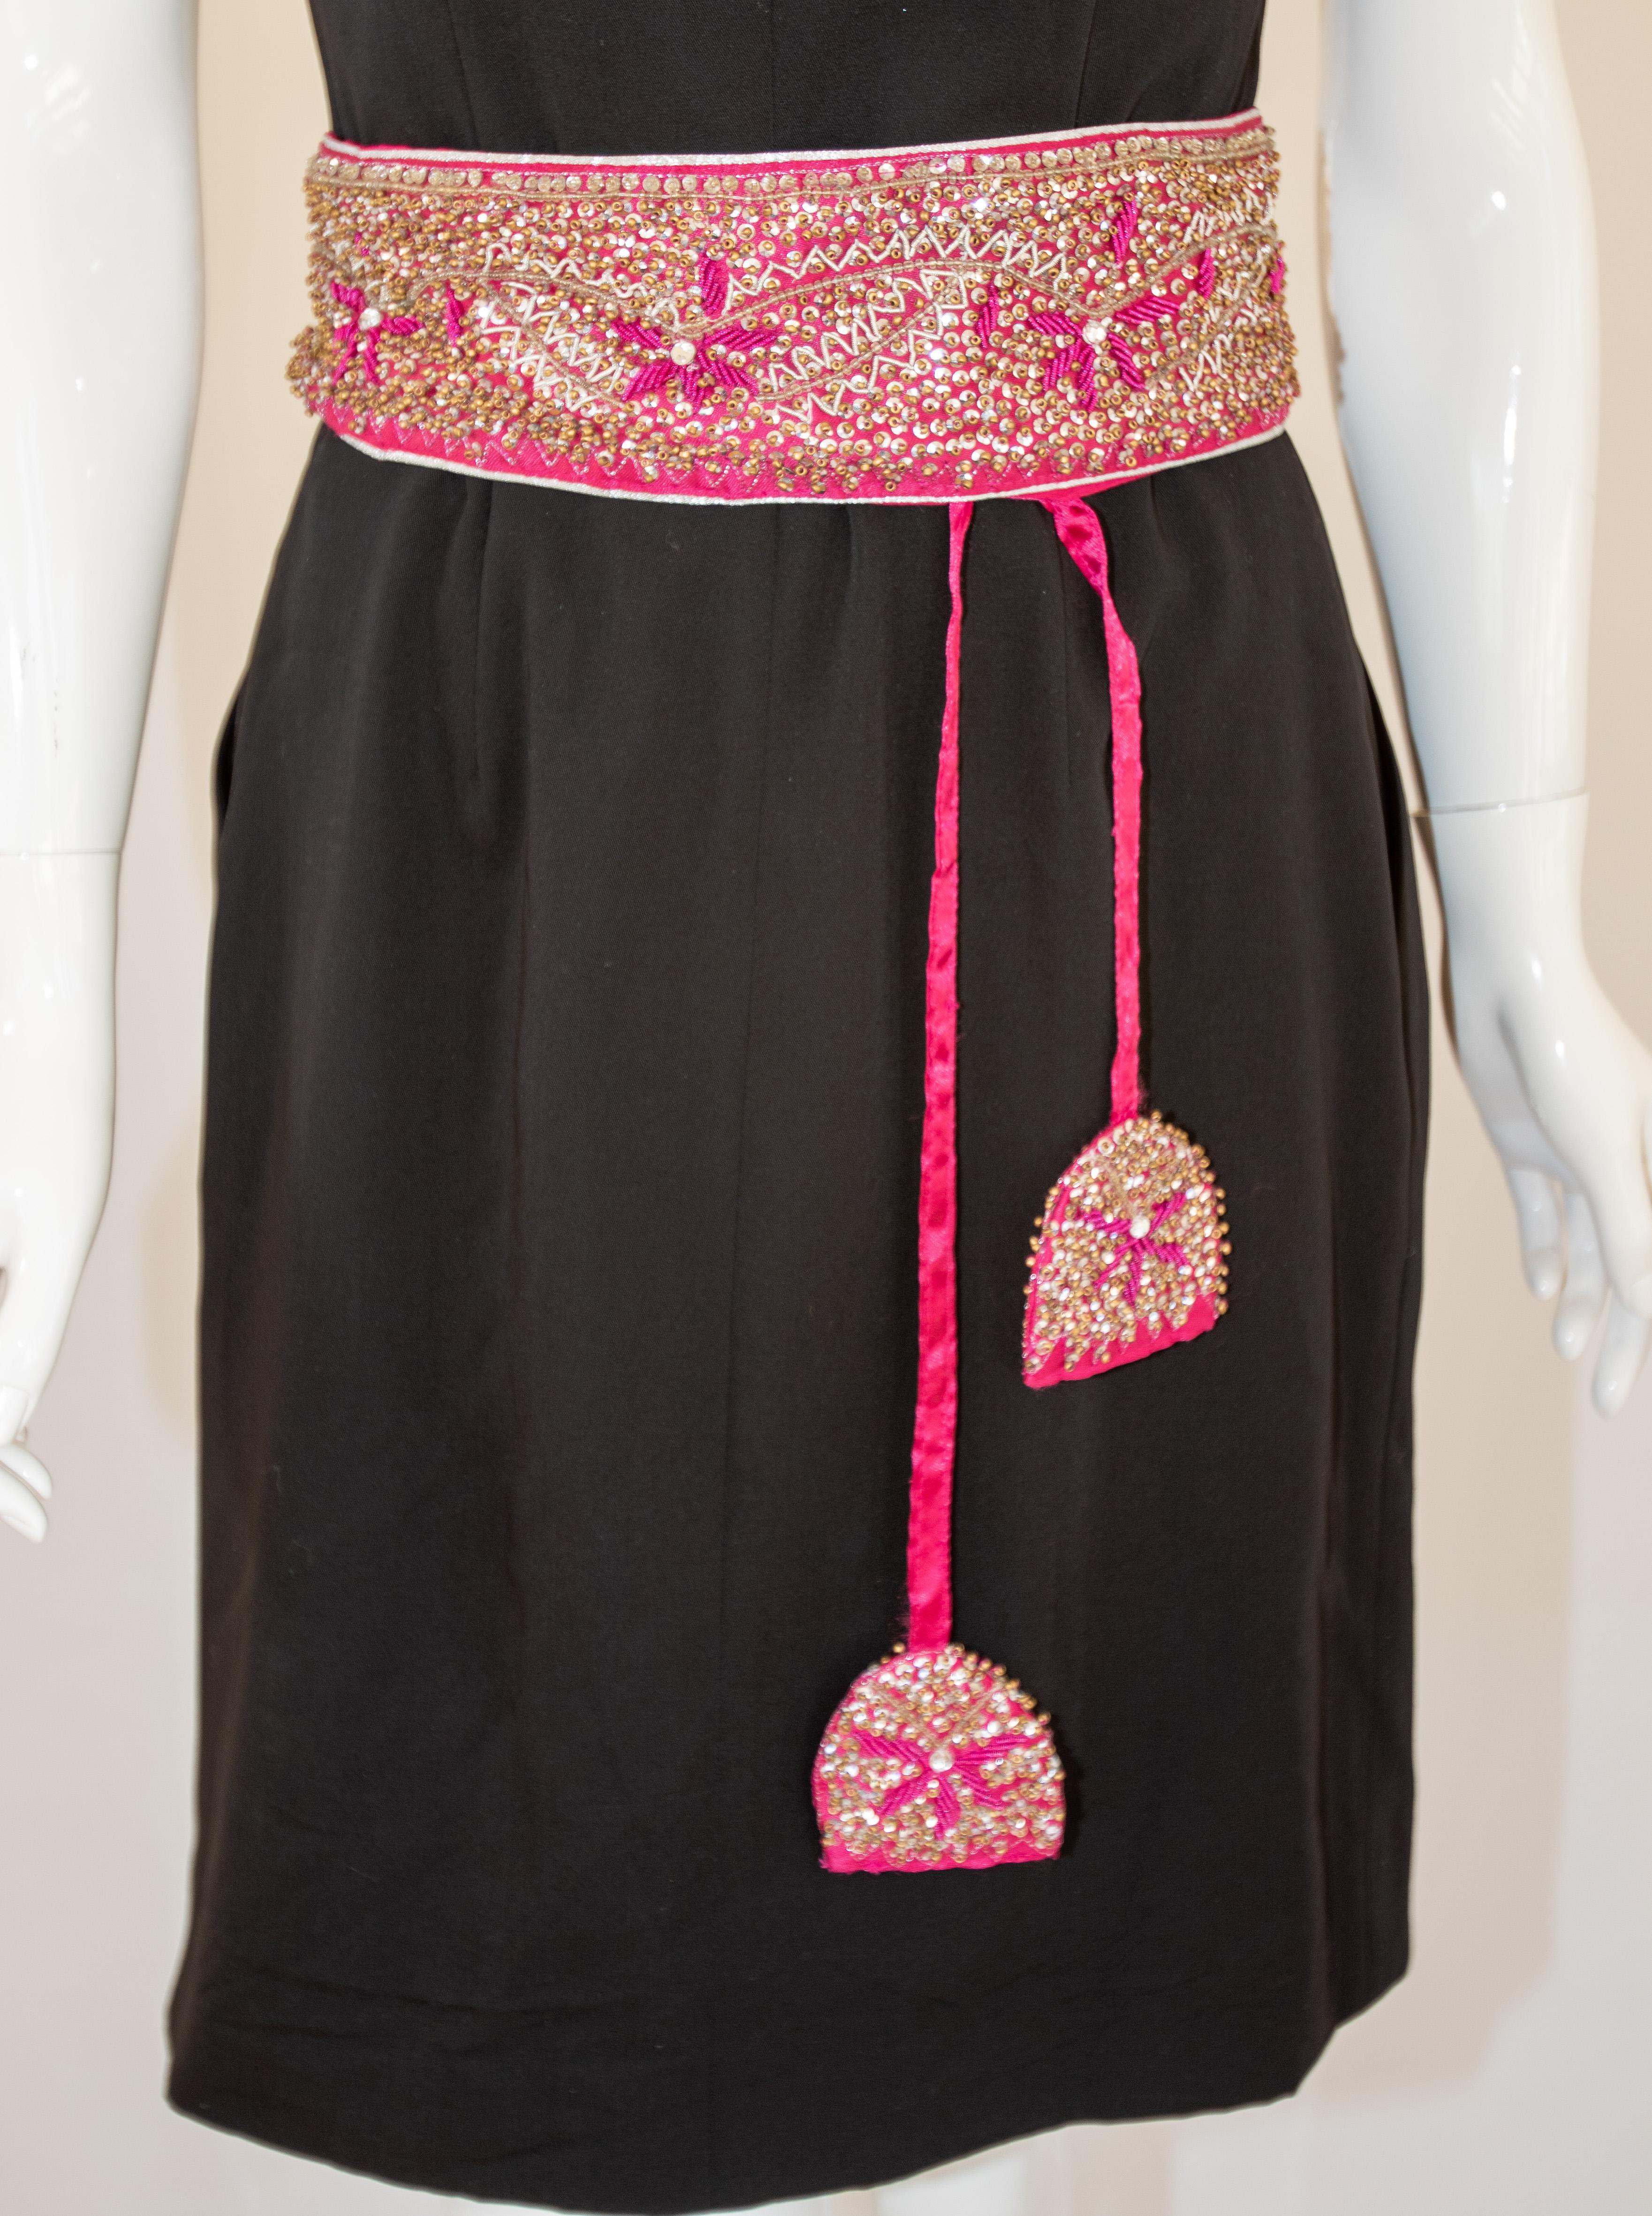 Grace your waistline with this saree embroidery Bohemian fuchsia pink belt. 
This hot pink belt is designed to give a very stylish bohemian look for your outfit.
Handcrafted maggam work waist belt embroidered on silk cloth.
Material: Silk Brocade